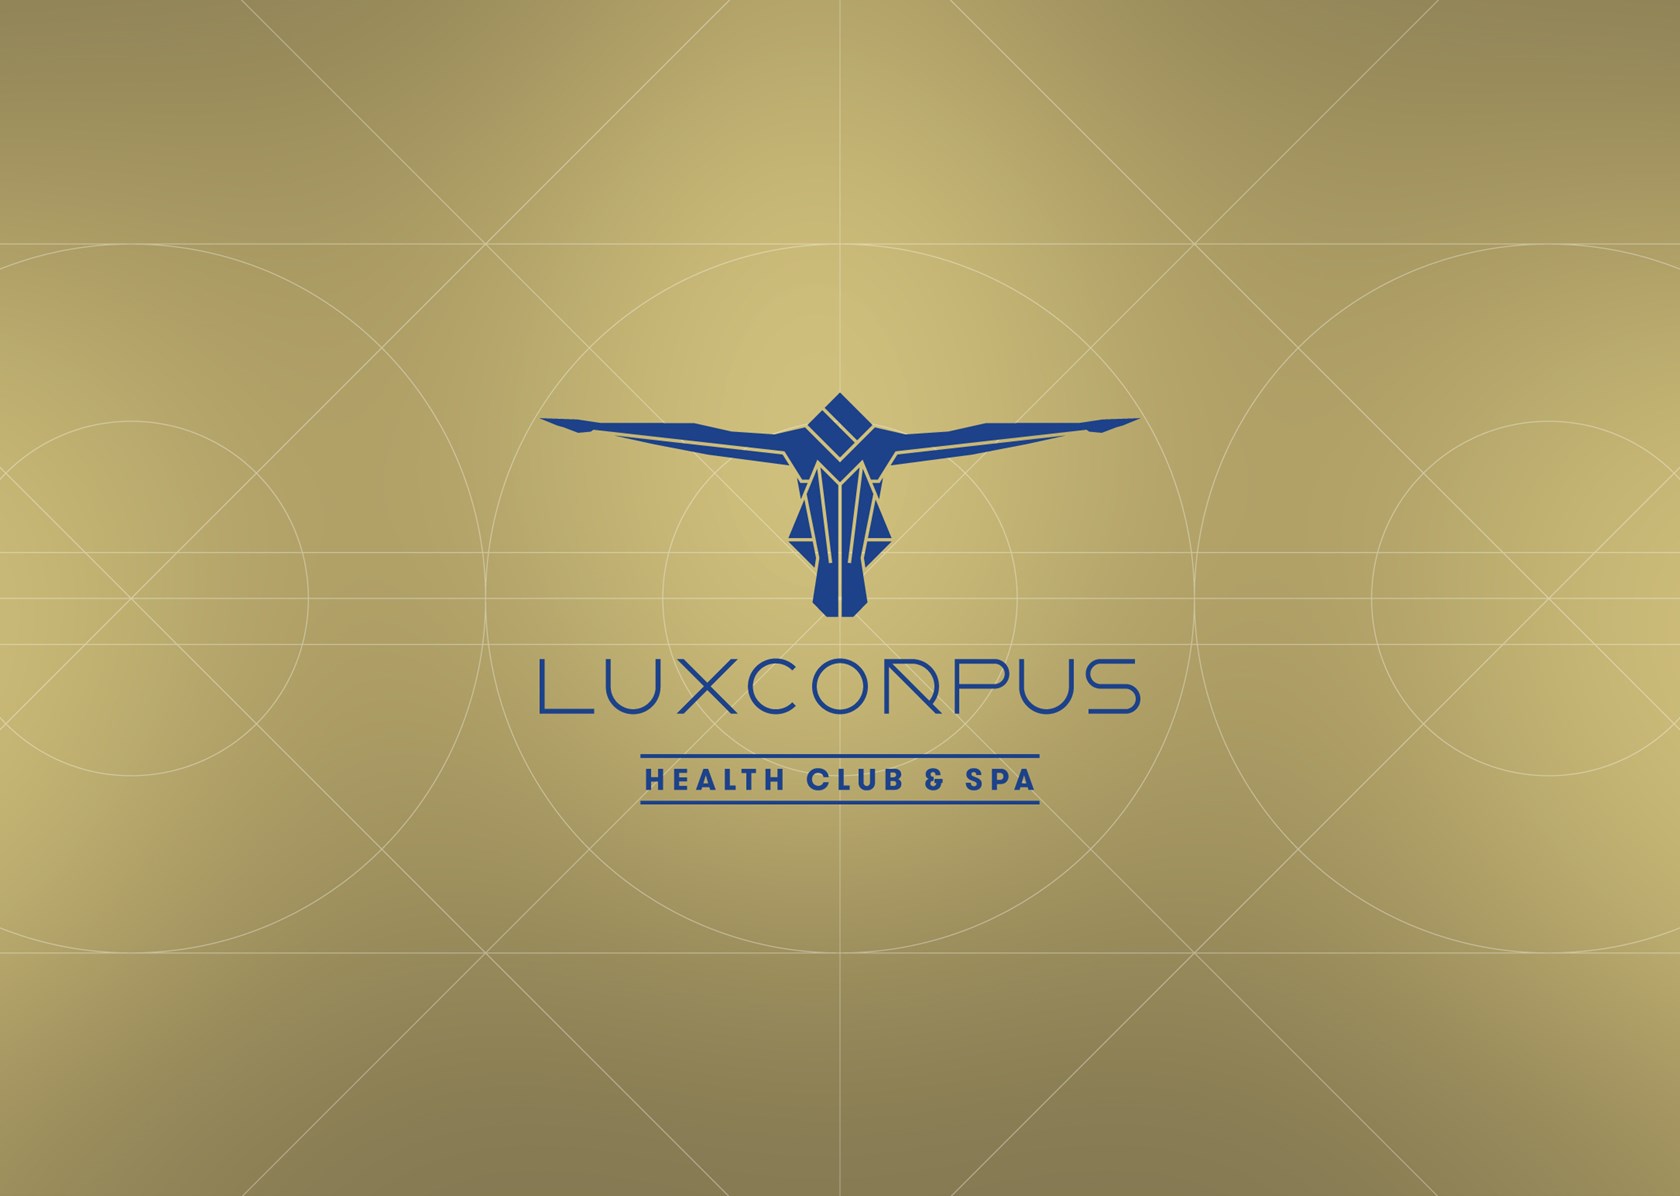 Luxcorpus Banners Website 02